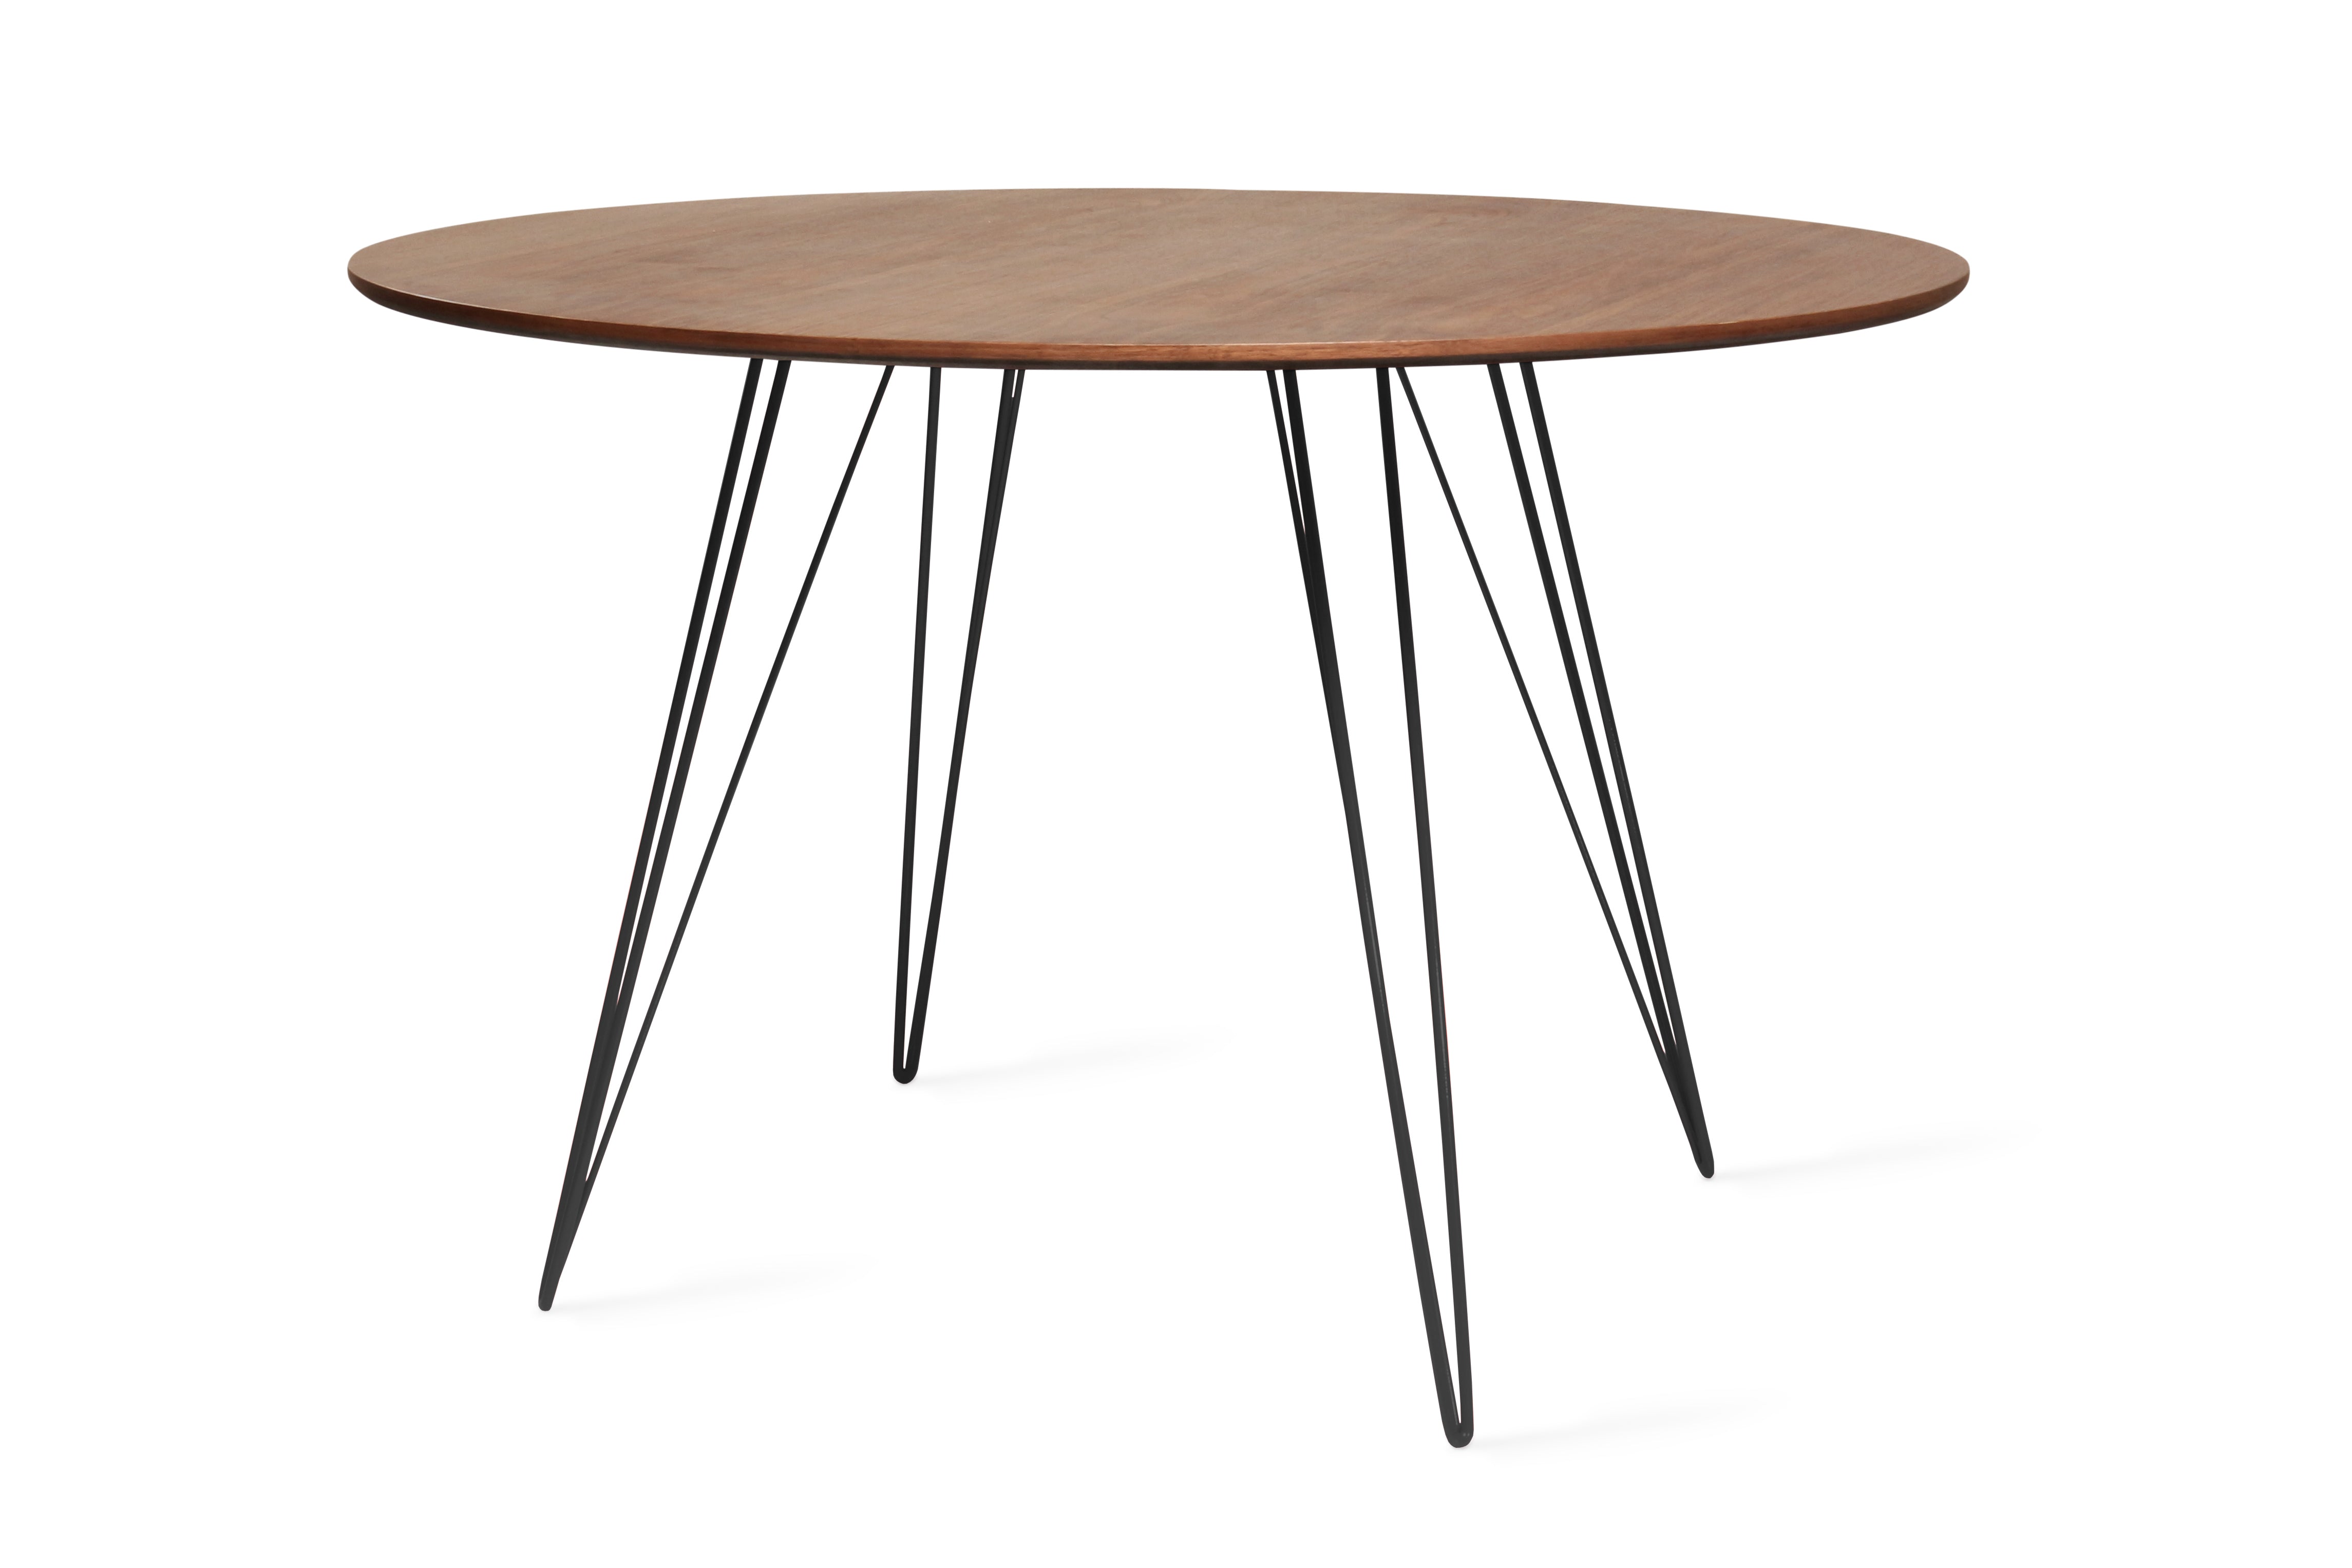 Round Walnut Dining Table, Walnut Wood Dining Table | Tronk Design